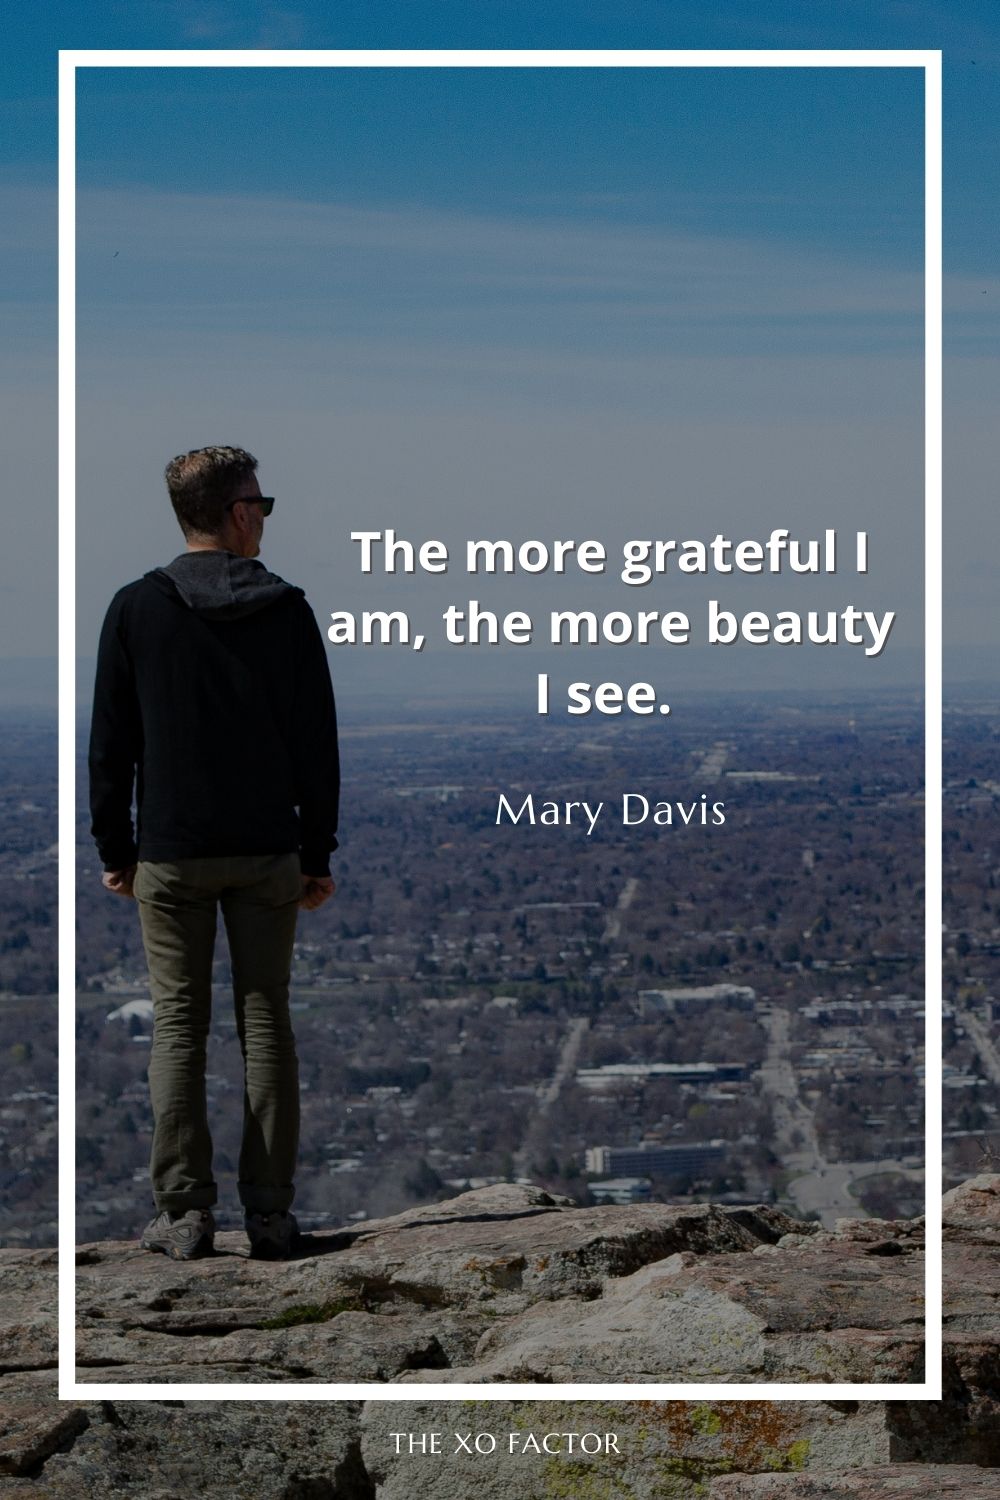 The more grateful I am, the more beauty I see. Mary Davis